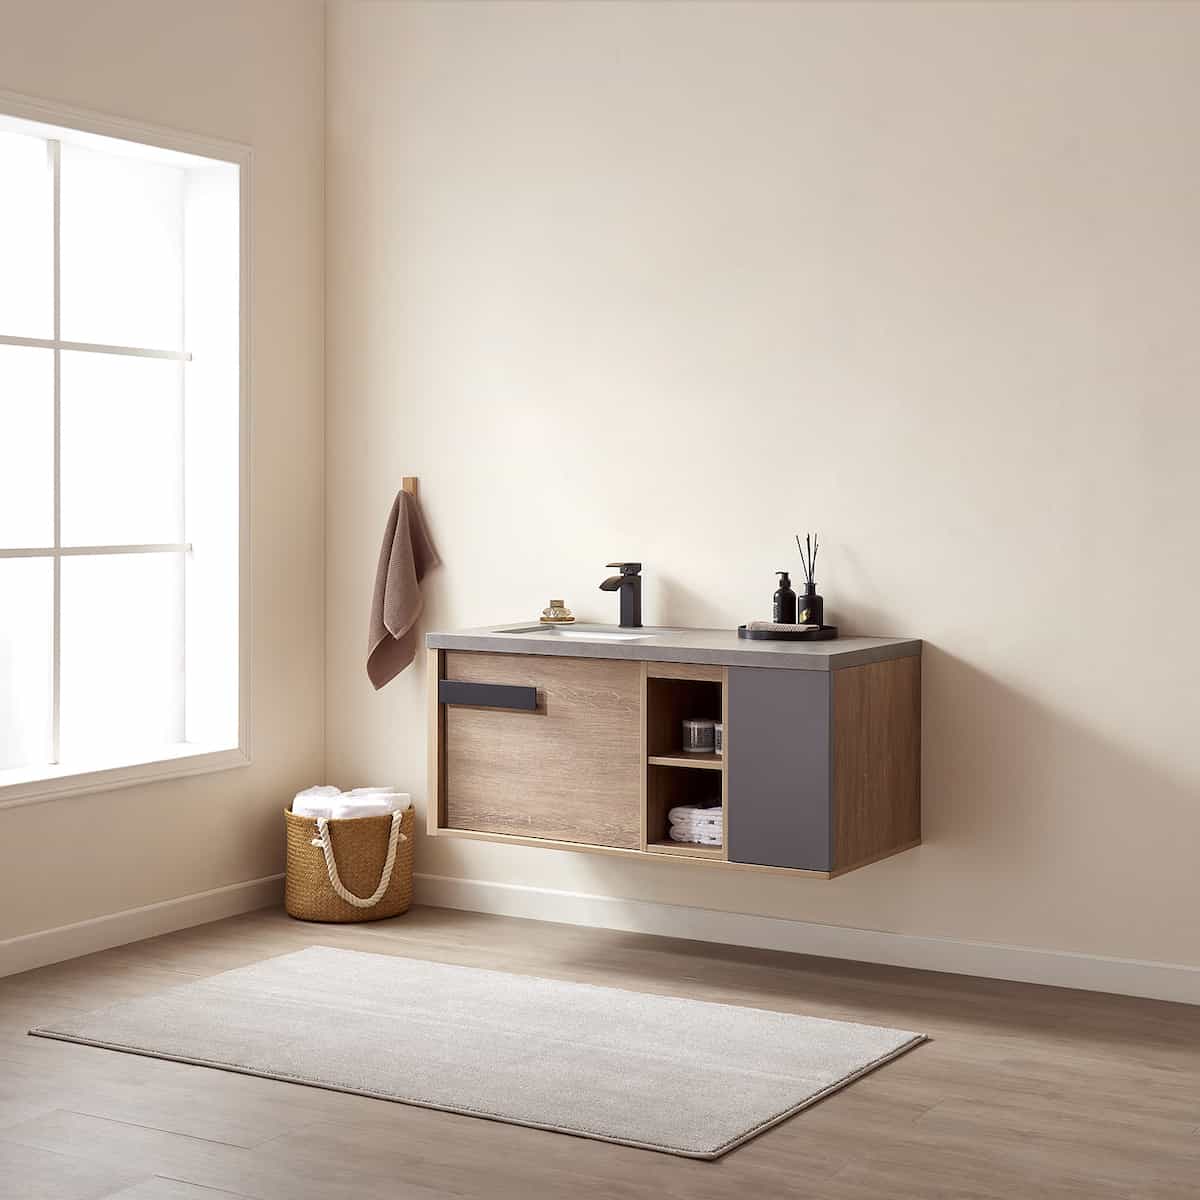 Vinnova Carcastillo 47 Inch Wall Mount Single Vanity in North American Oak with Grey Sintered Stone Top Without Mirror Side 703247-NO-WK-NM